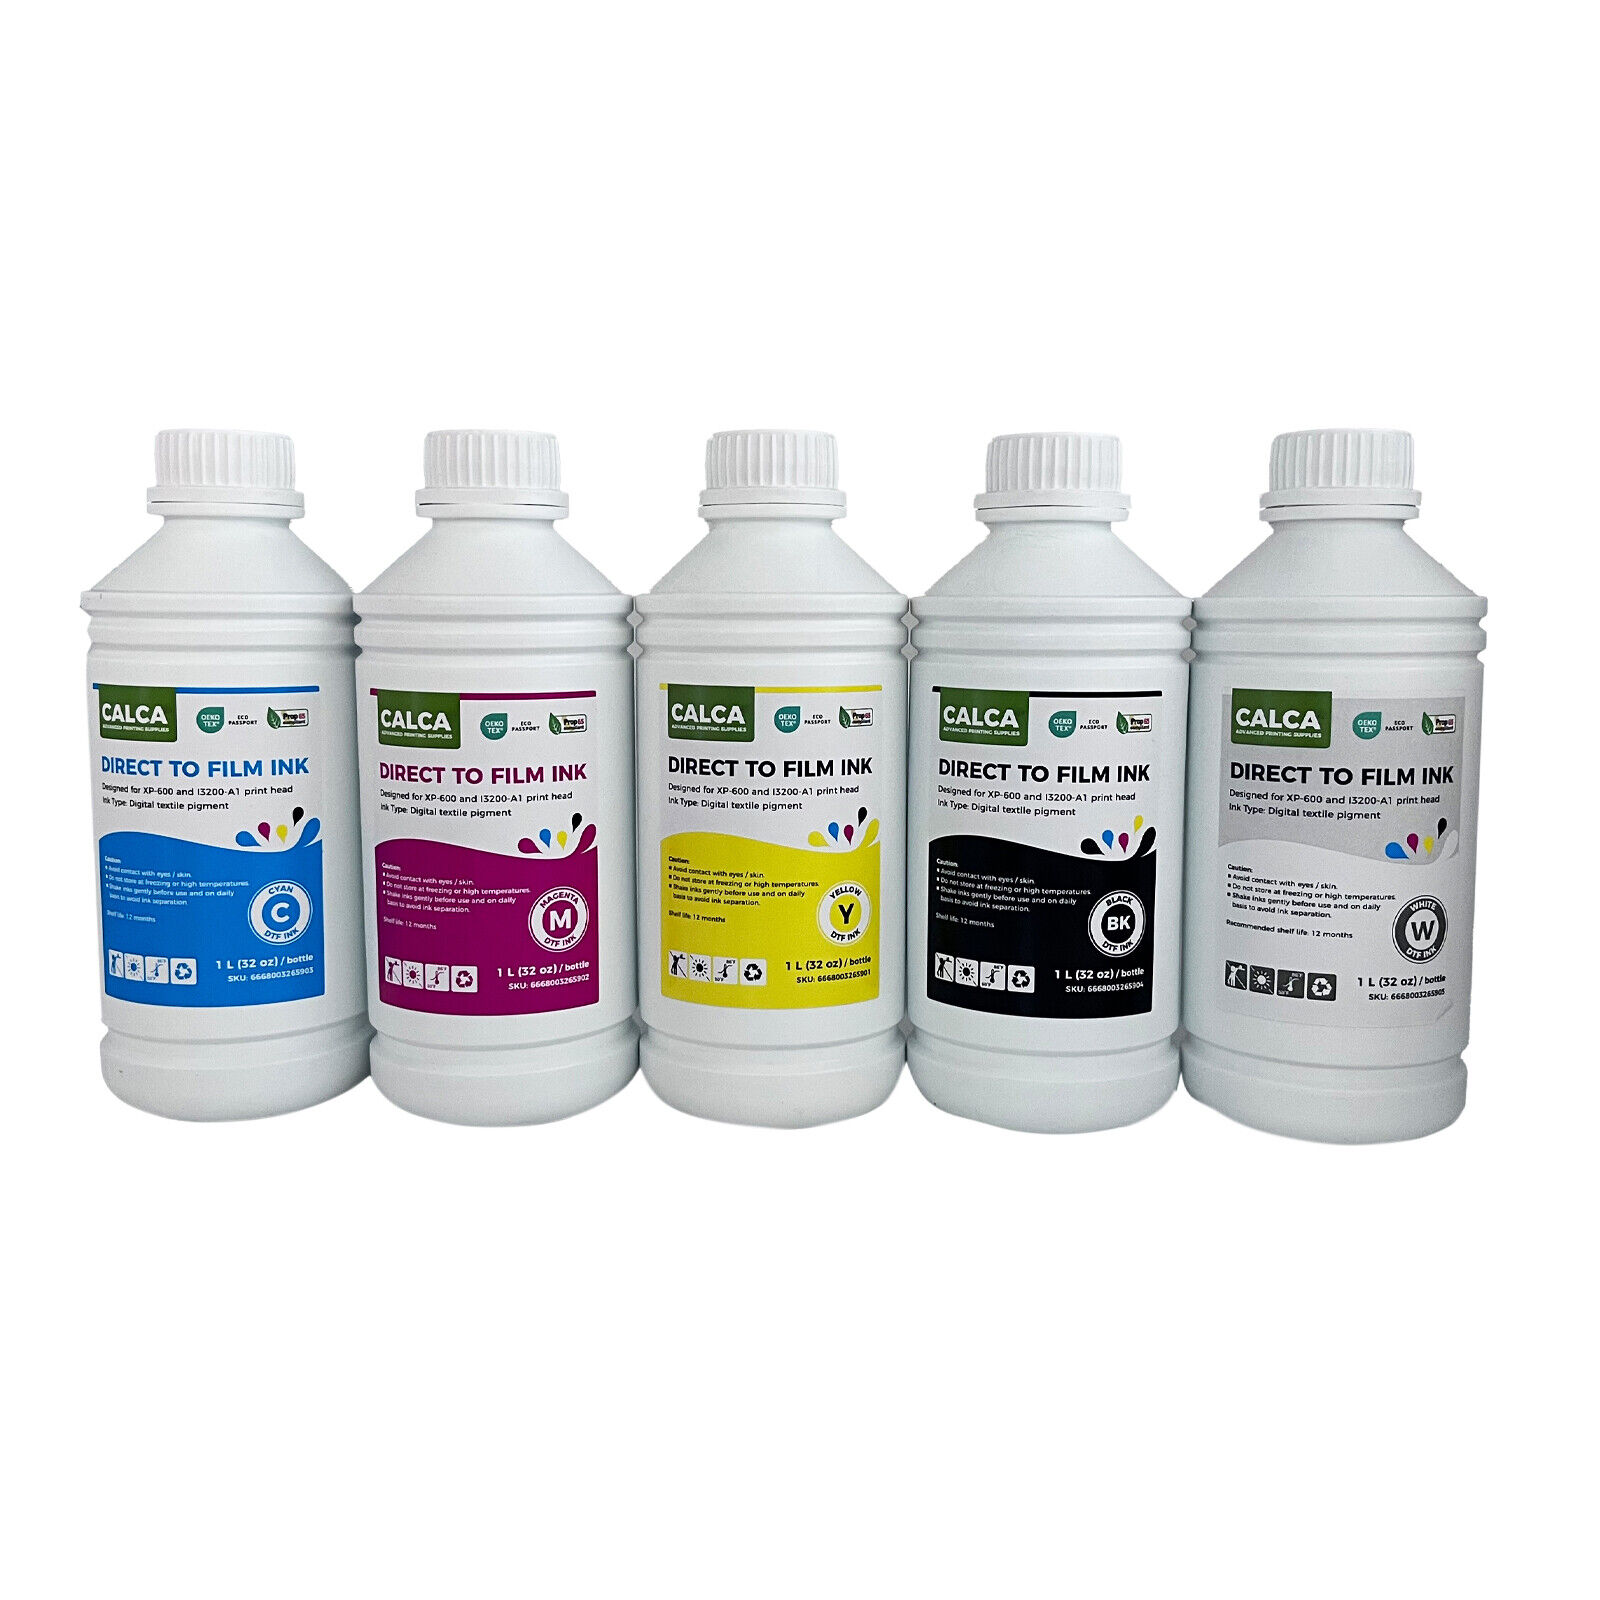 CALCA 1L Direct to Transfer Film Ink for Epson Printheads Water-based Inks 32OZ